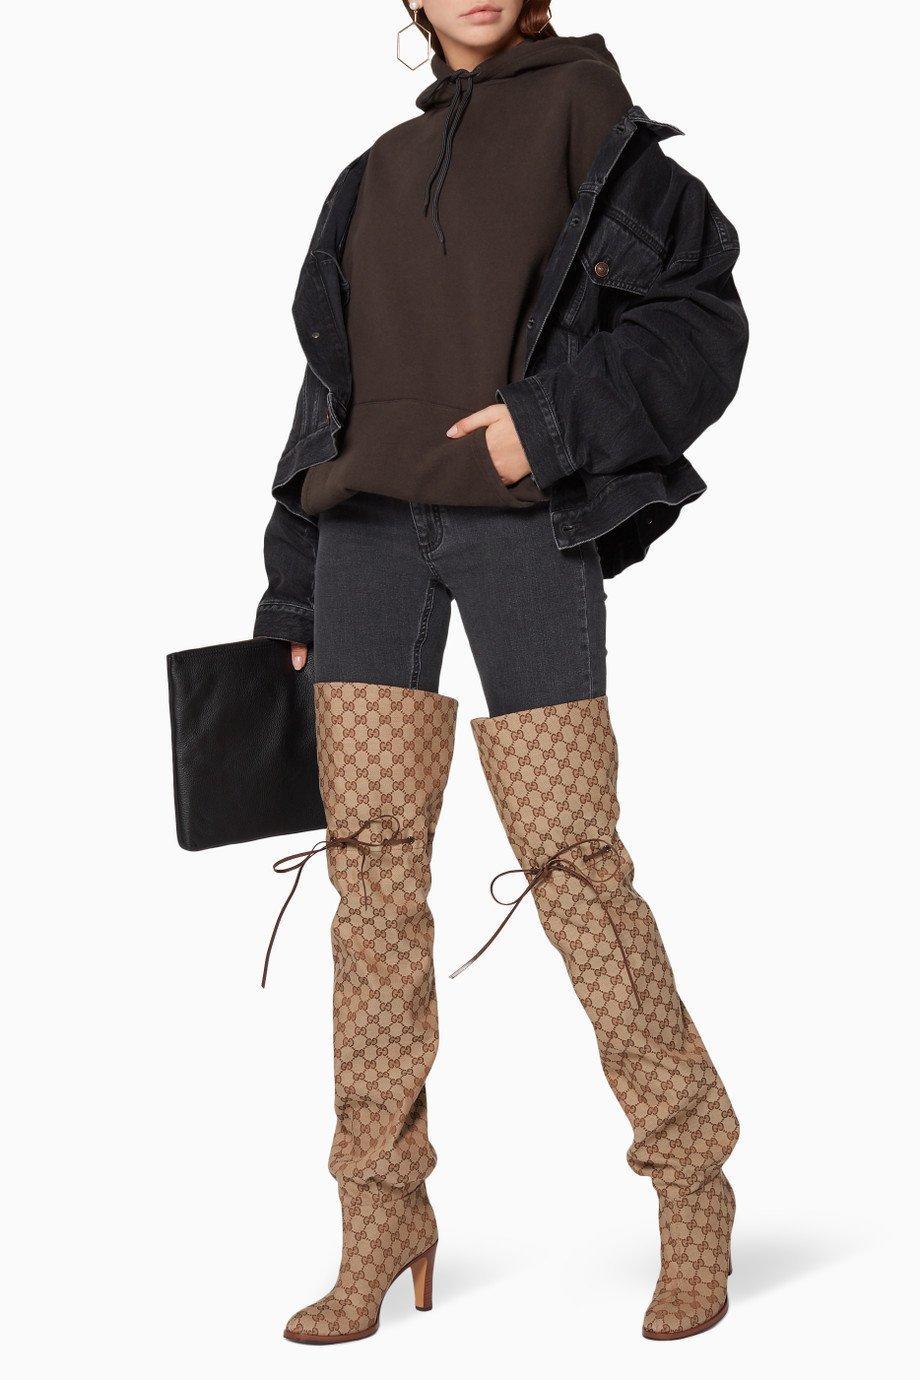 gucci boots over the knee